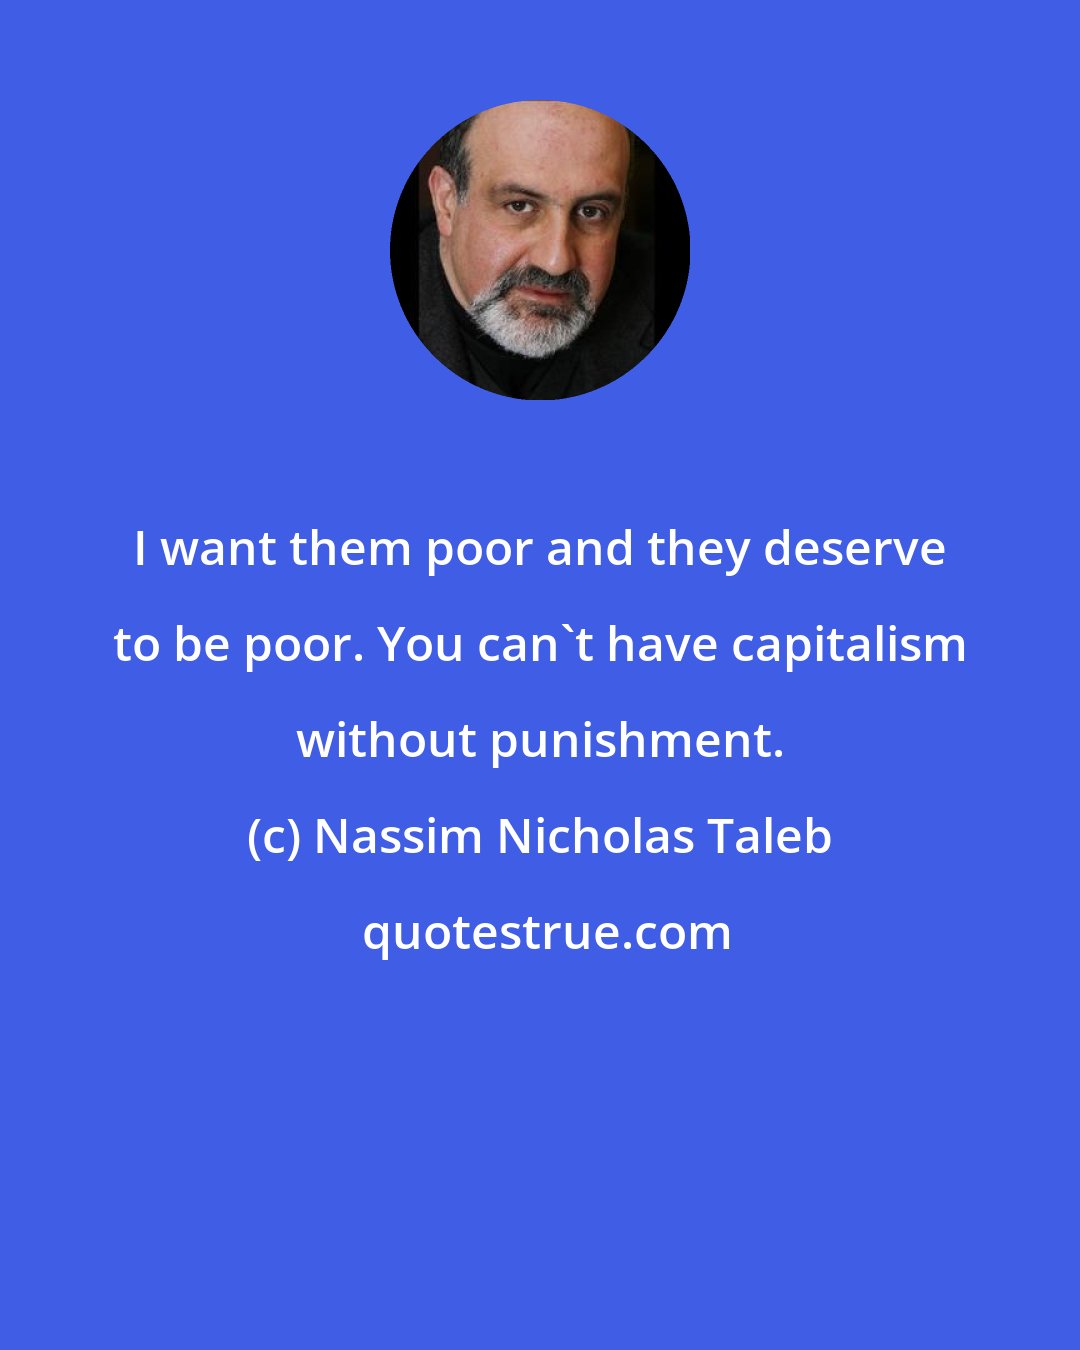 Nassim Nicholas Taleb: I want them poor and they deserve to be poor. You can't have capitalism without punishment.